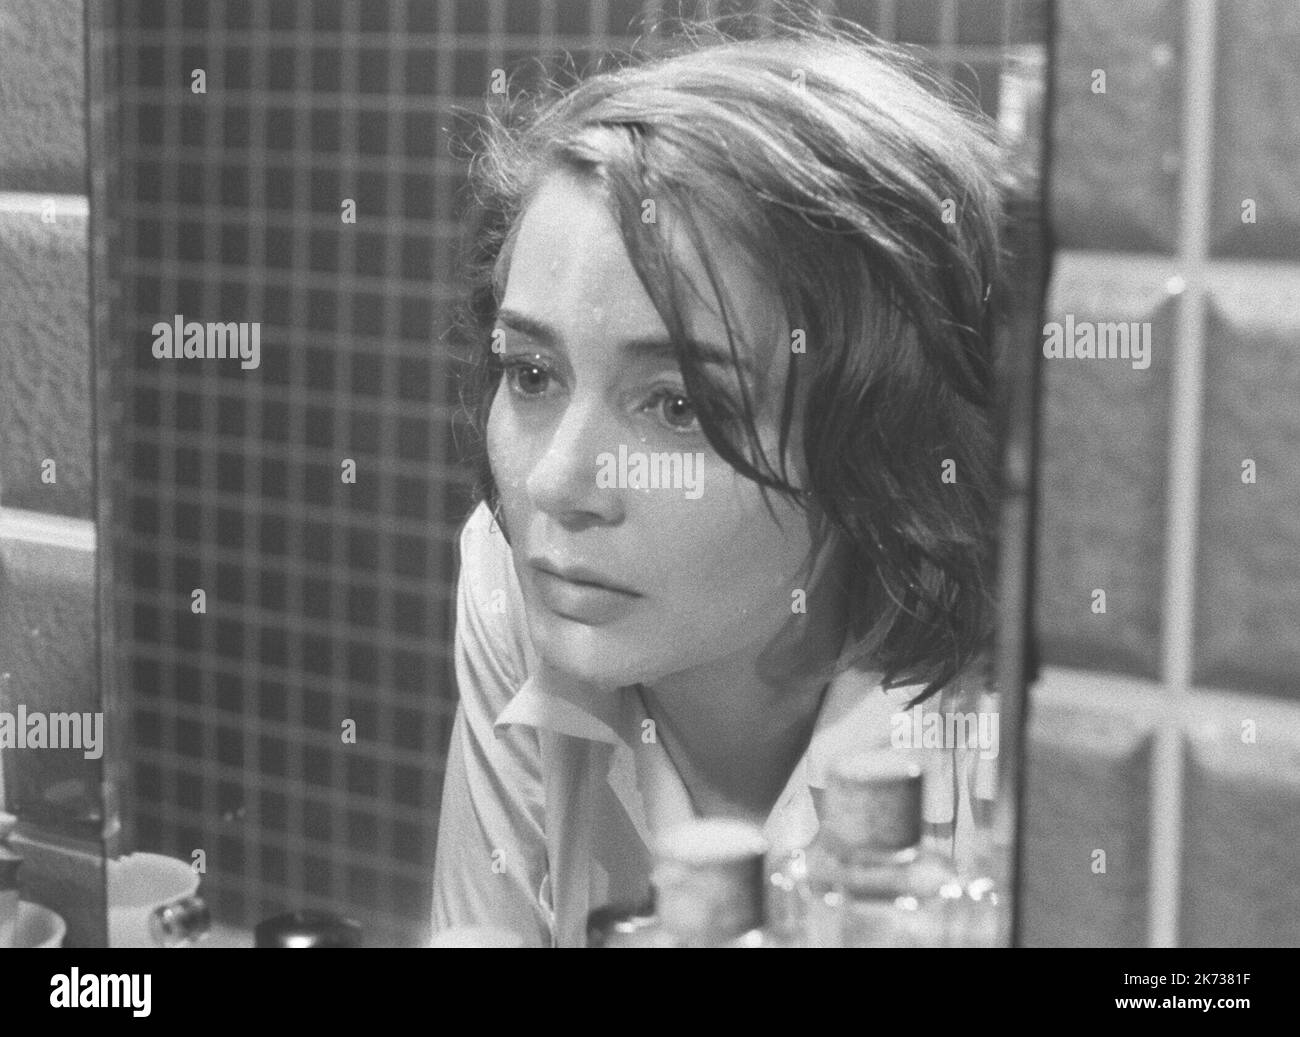 Emmanuelle Black and White Stock Photos & Images - Alamy